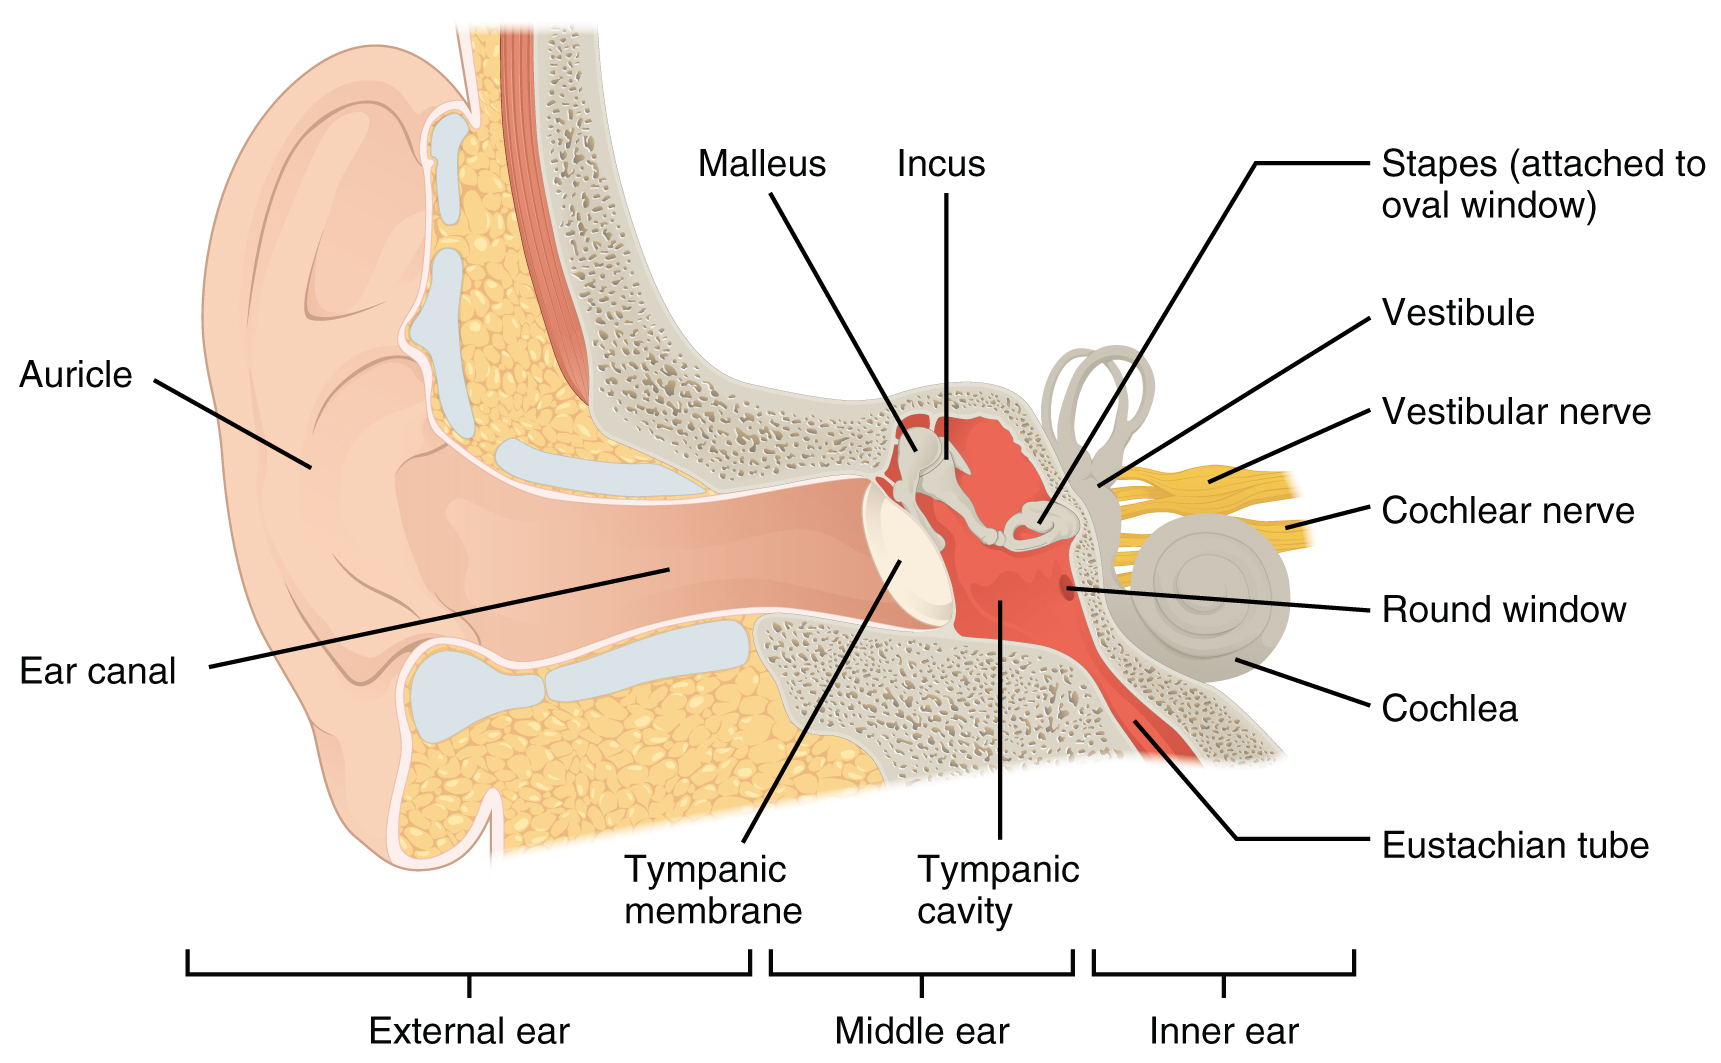 1404_The_Structures_of_the_Ear.jpg